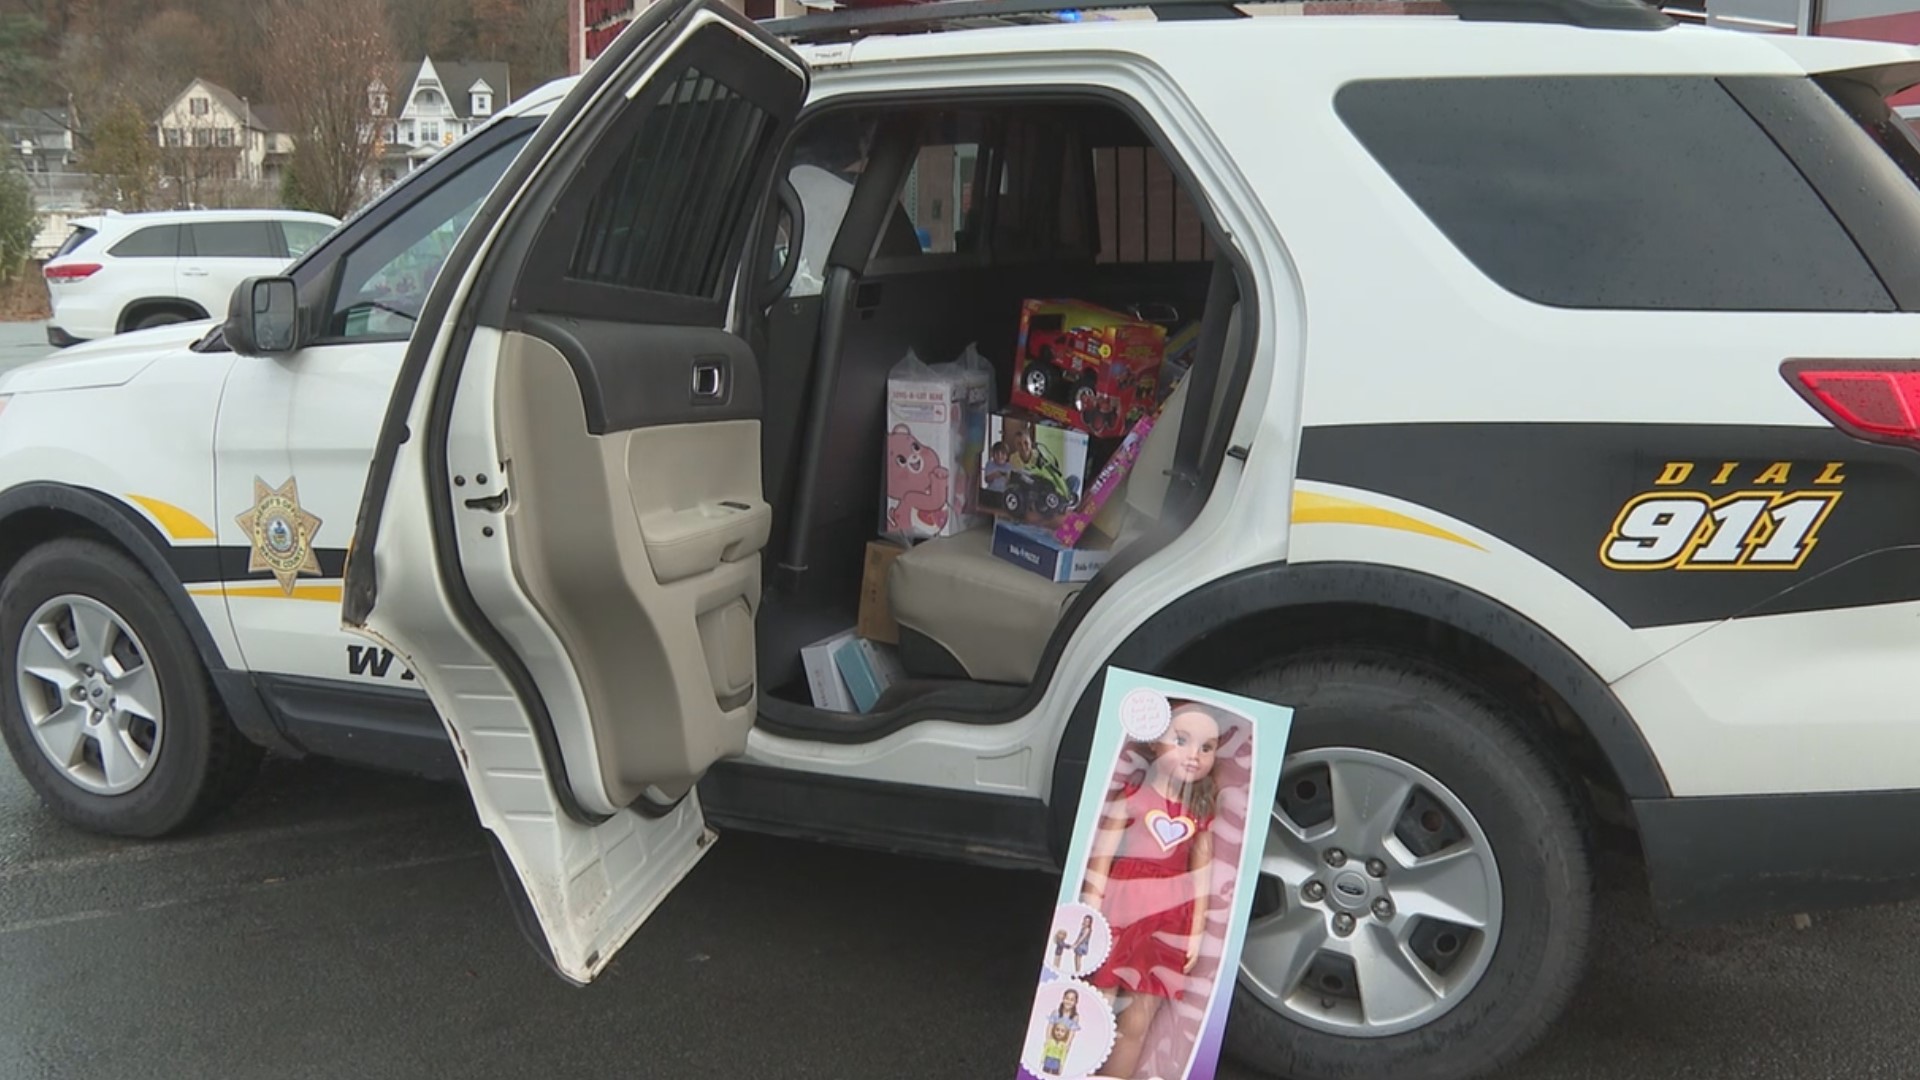 The Wayne County Sheriff's Office is resuming its Cram the Cruiser Toy Drive.